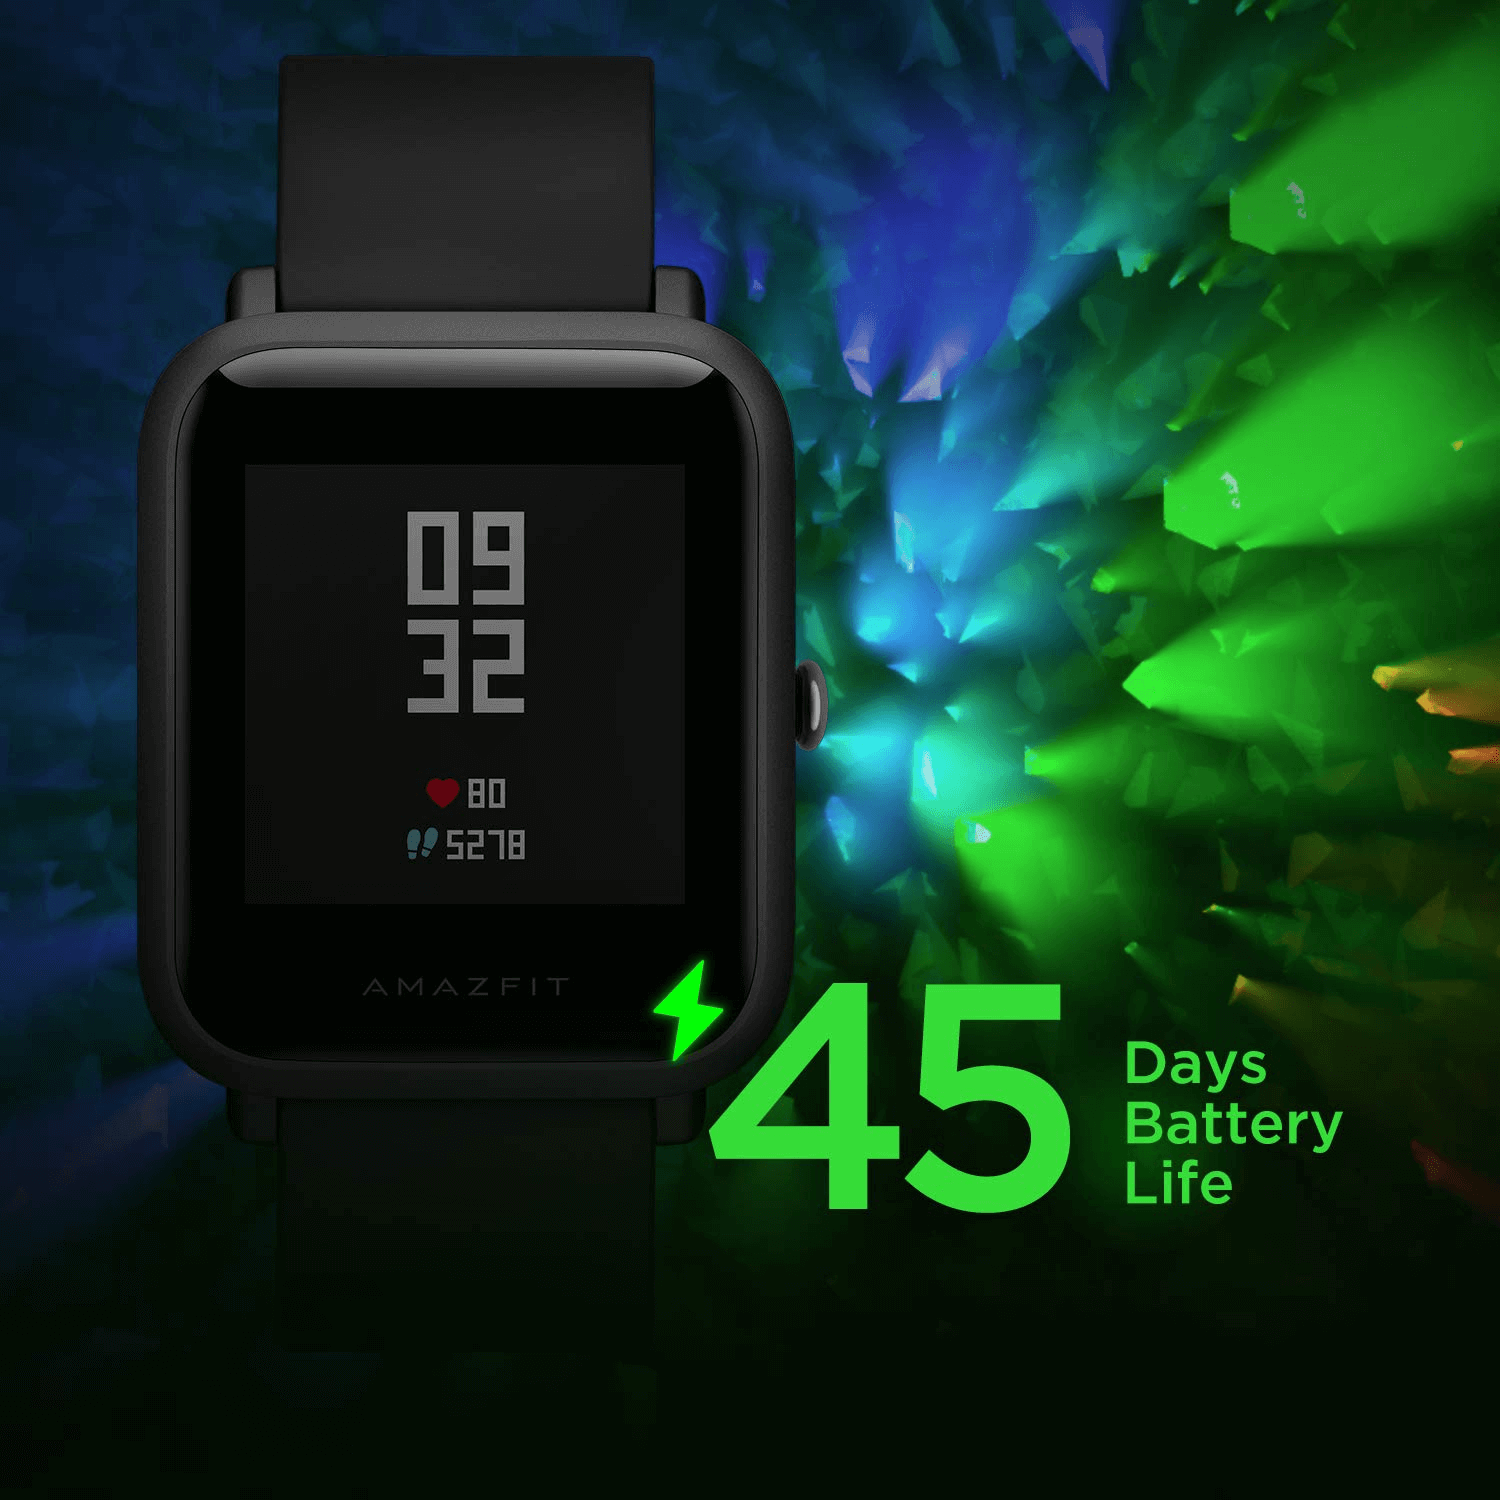 Amazfit Bip LIte 3ATM Water Resistance Smart watch 45 Days Battery Life for Android and ios - Black